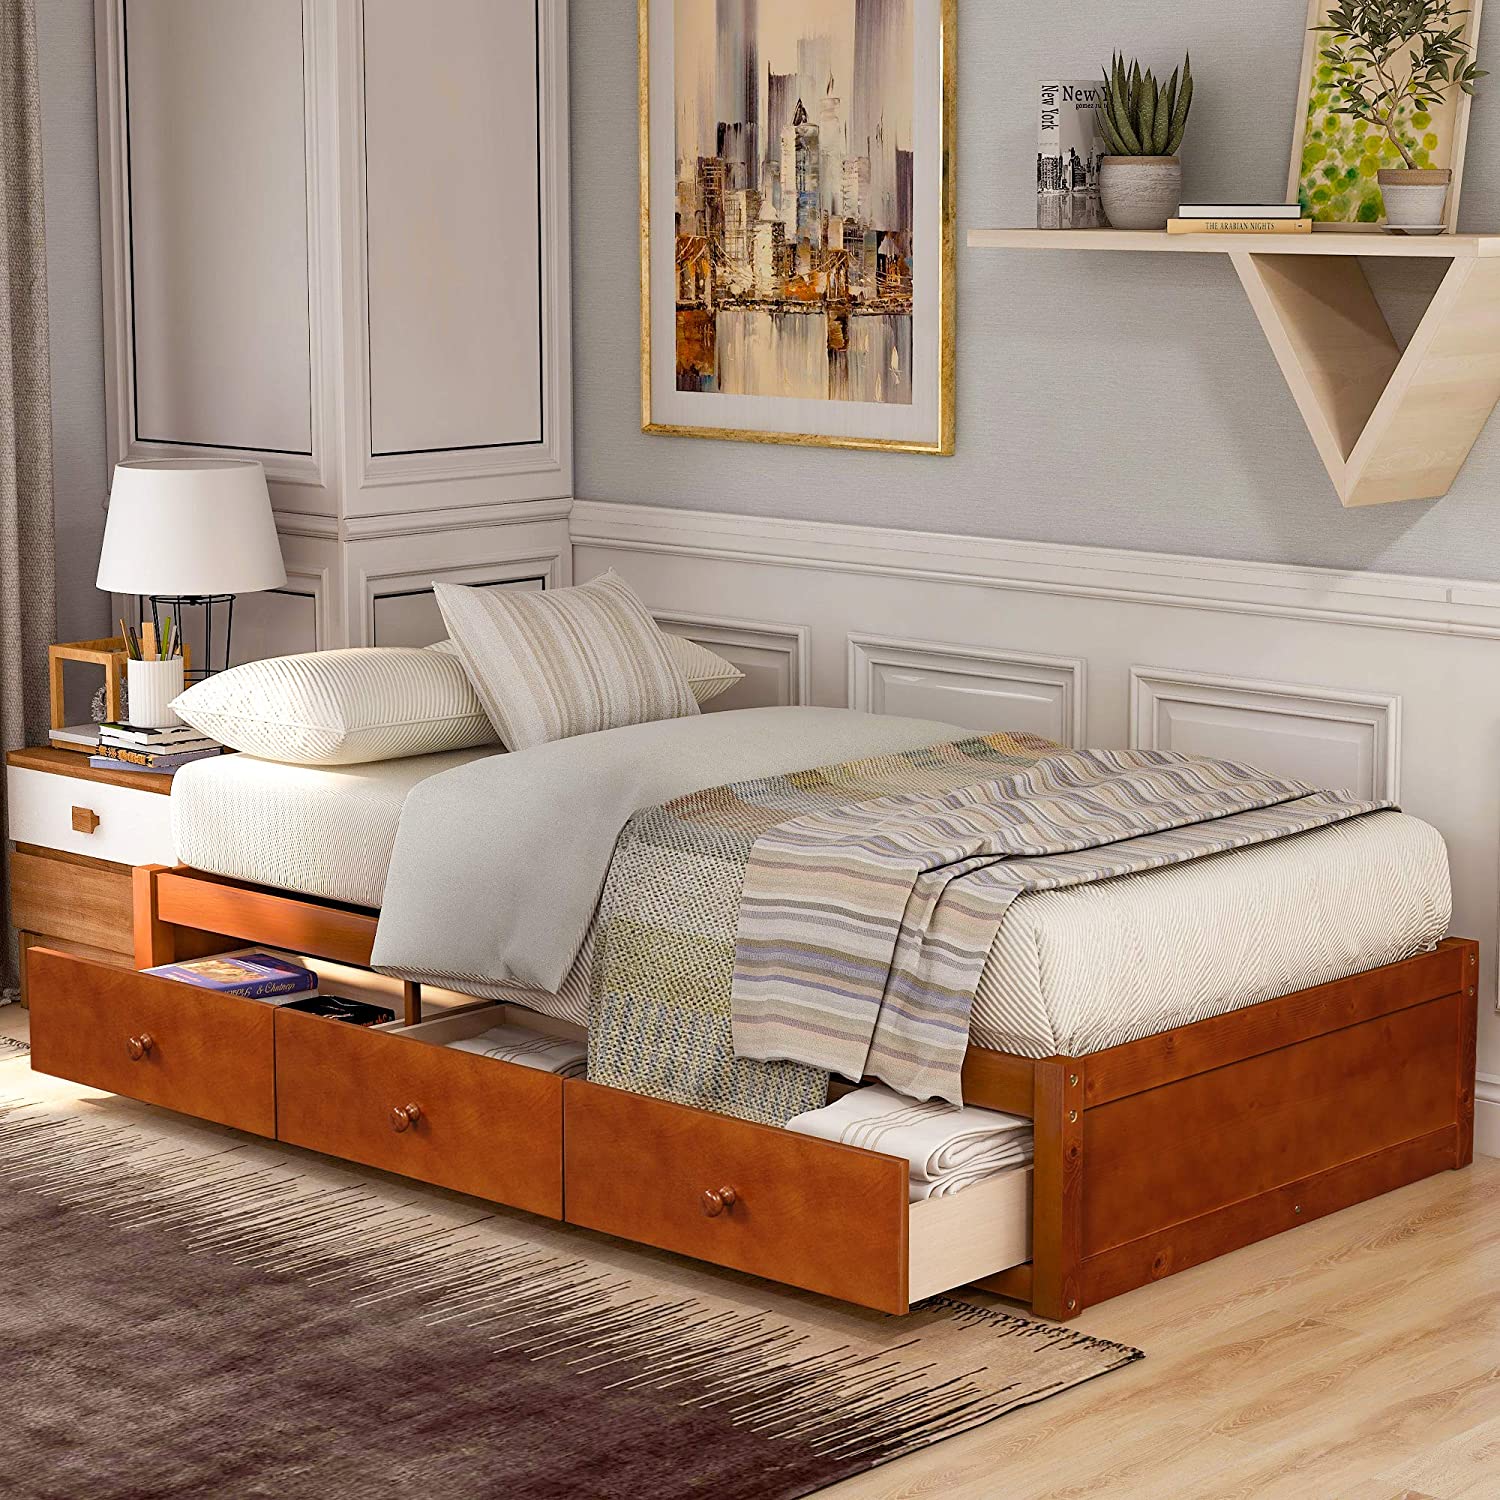 Bed With Compartment The, Memomad Bali Storage Platform Bed With Drawers Twin Size Caramel